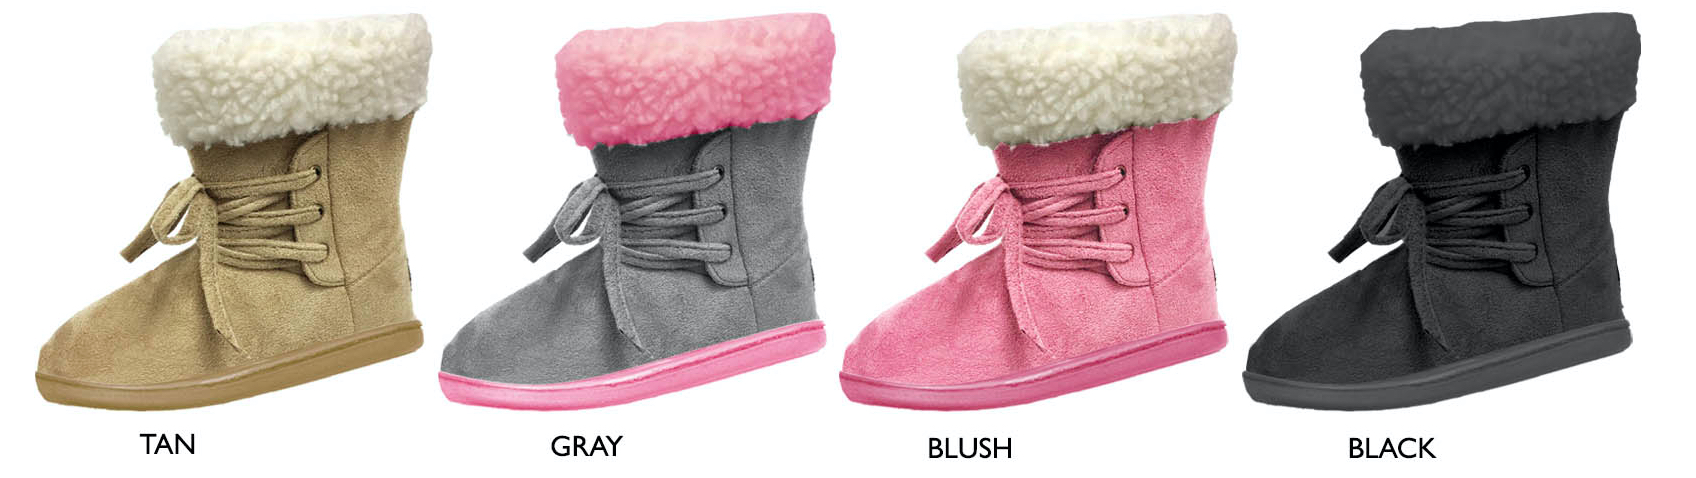 Girl's Microsuede Winter BOOTS w/ Laces & Sherpa Cuffs